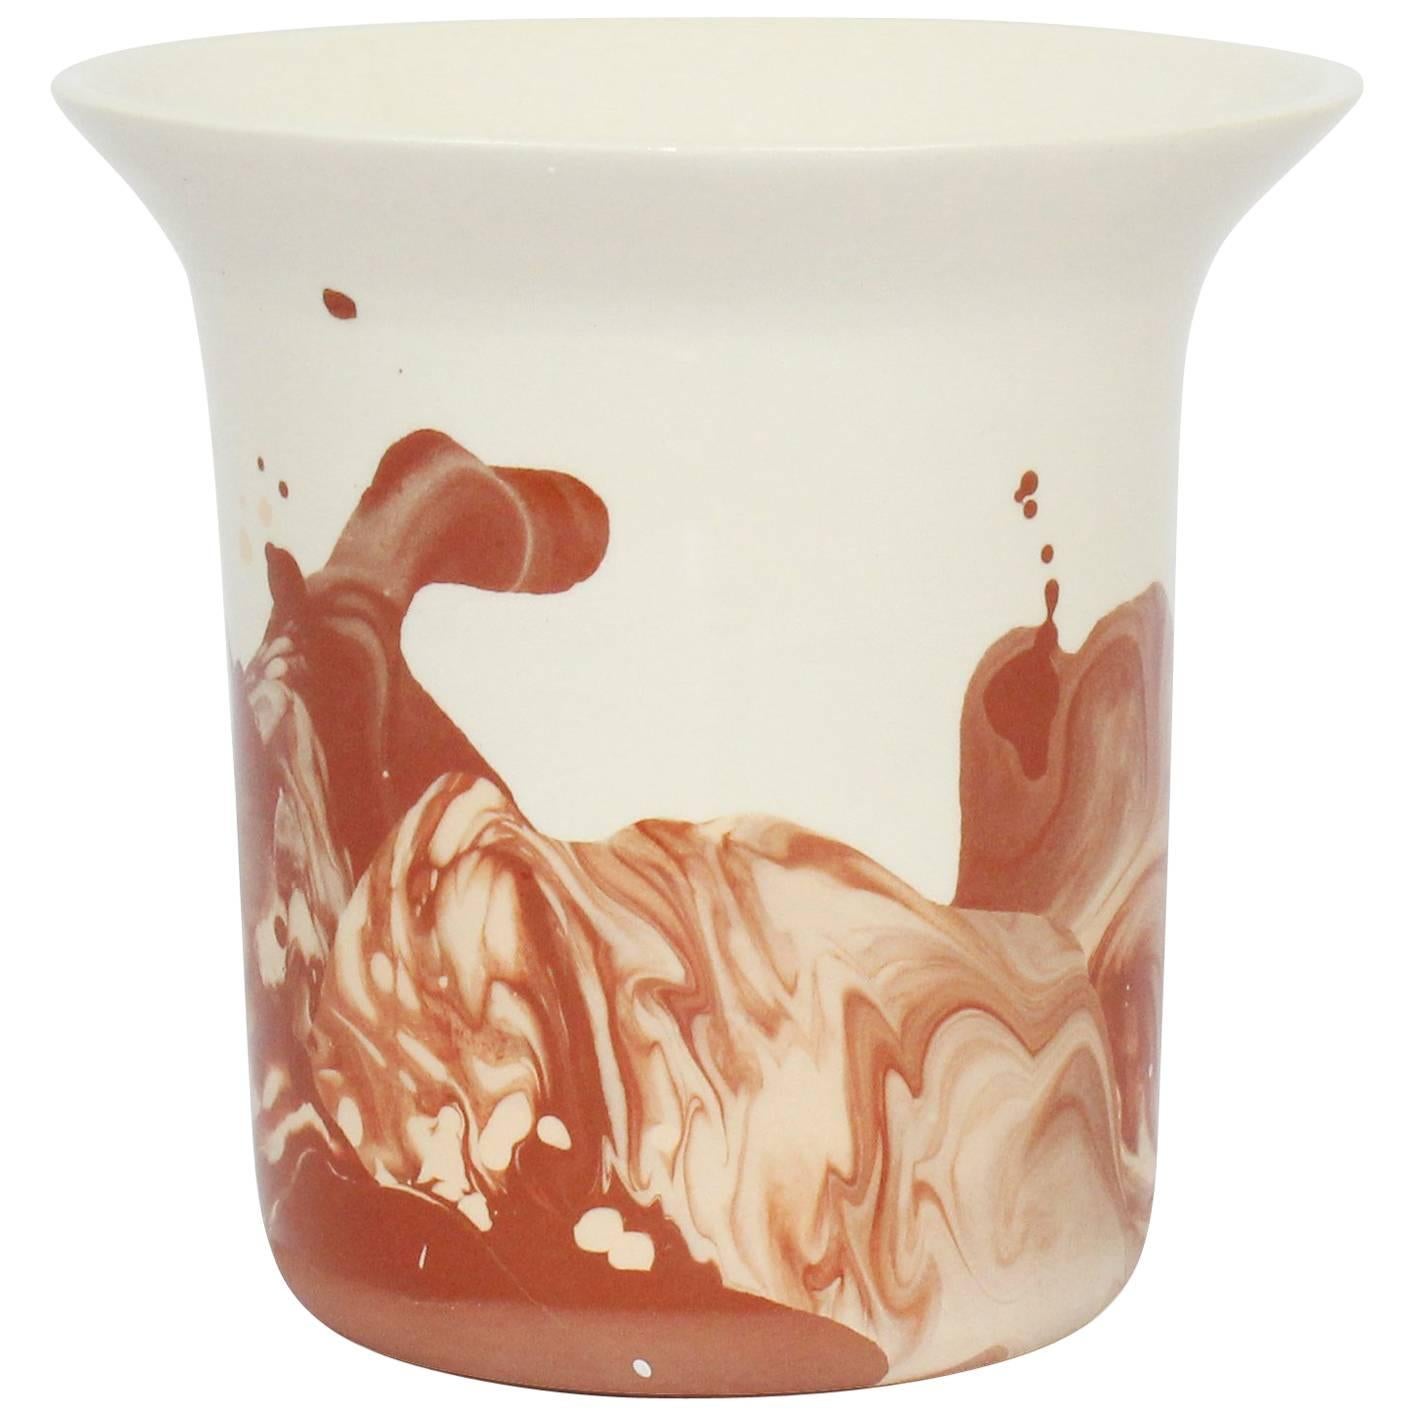 Contemporary Handmade Marbled Ceramic Vase - White, Peach and Brown For Sale